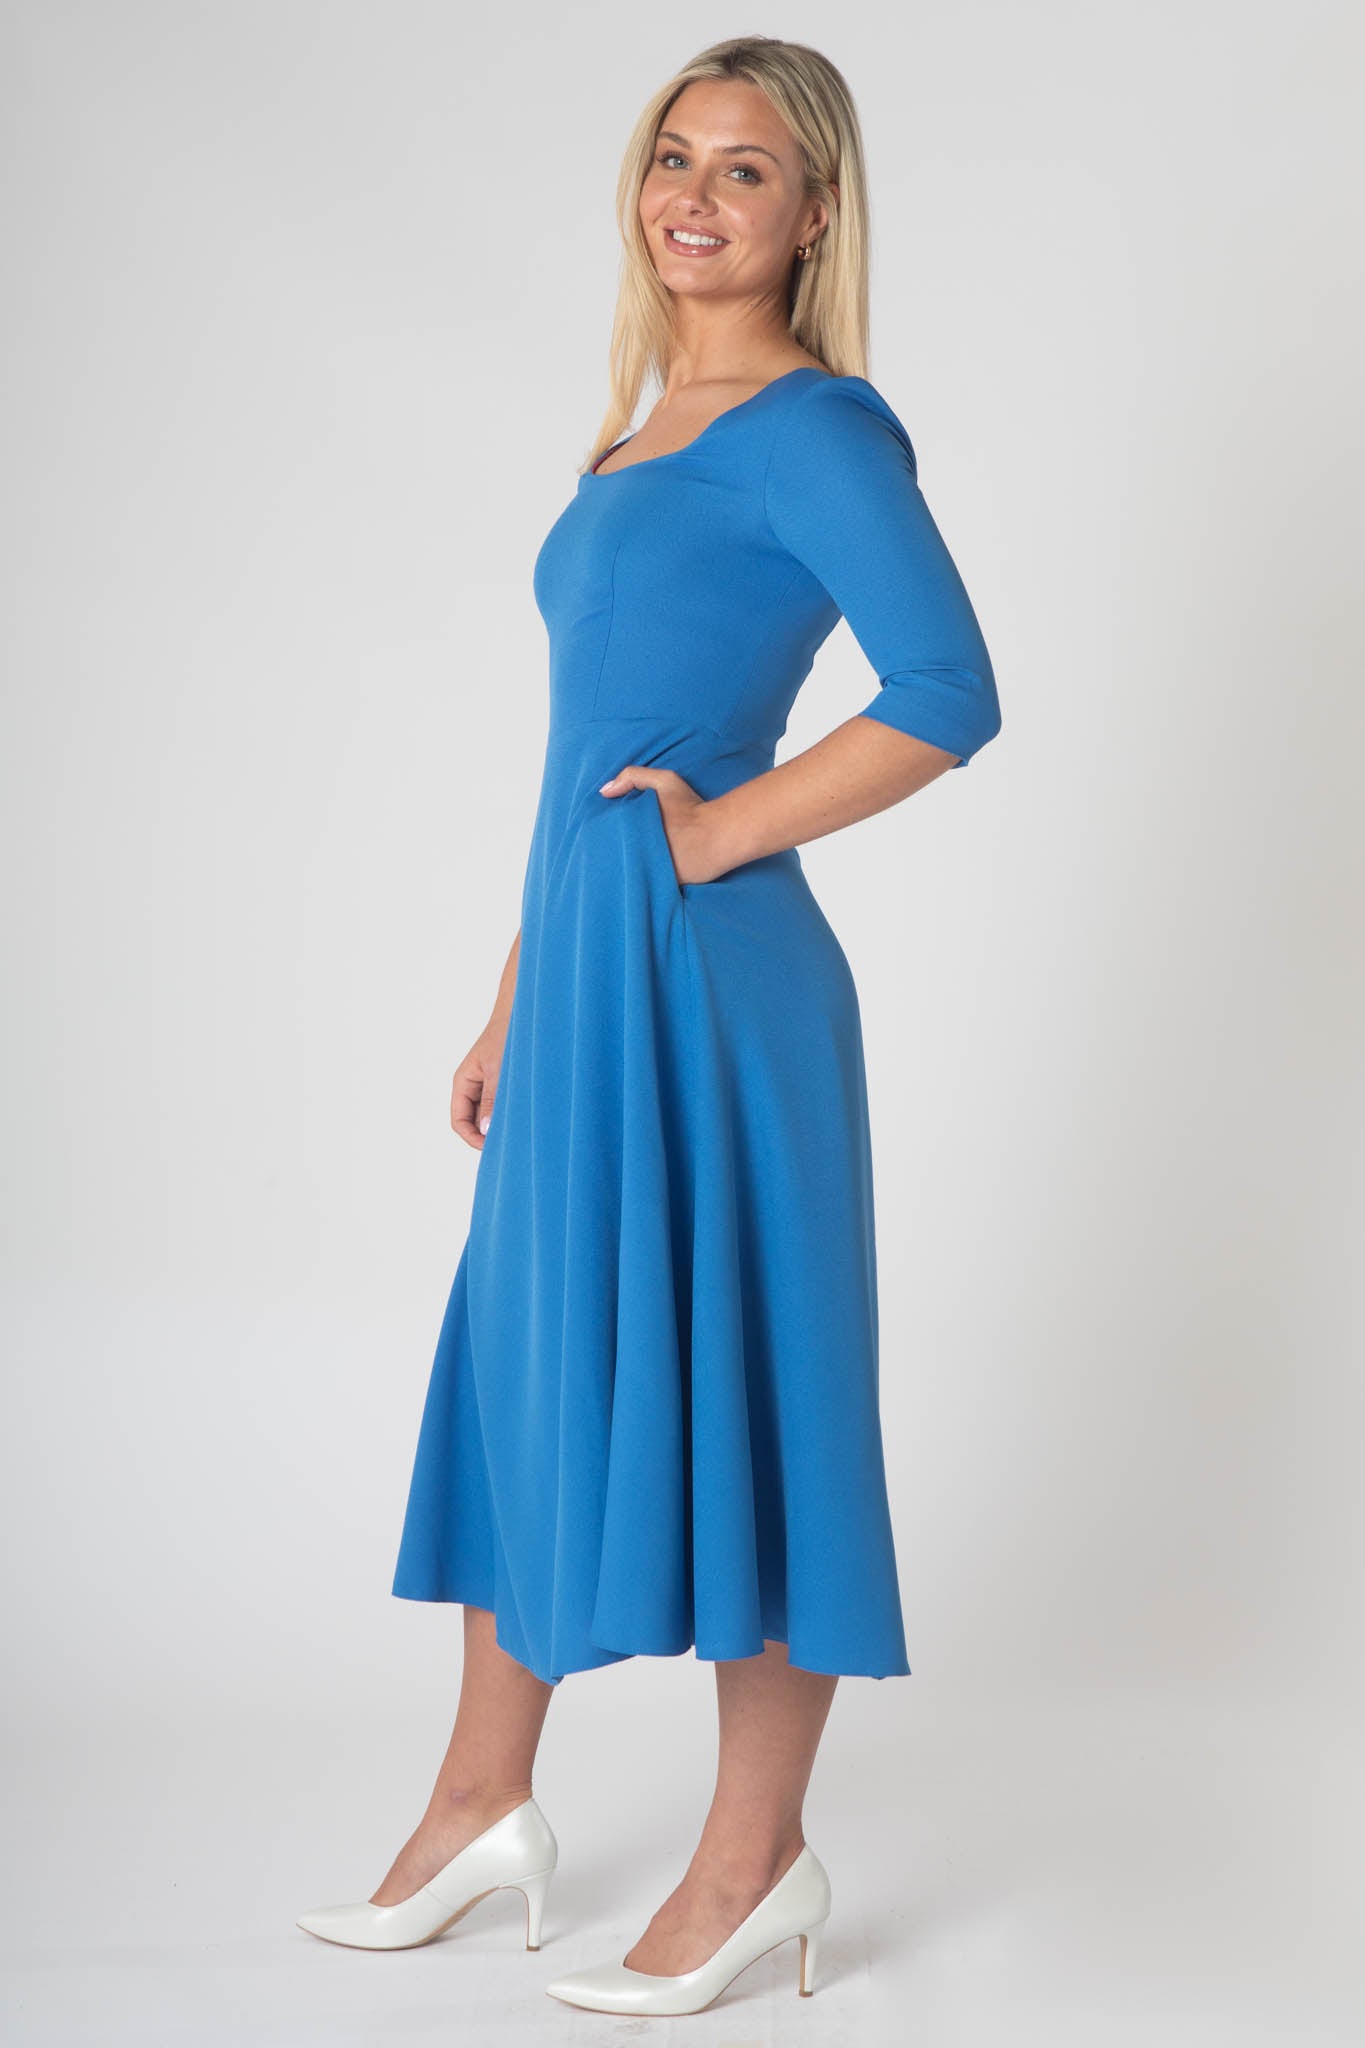 Porsha Dress With Round Neck And Contrast Lining - Blue/Pink